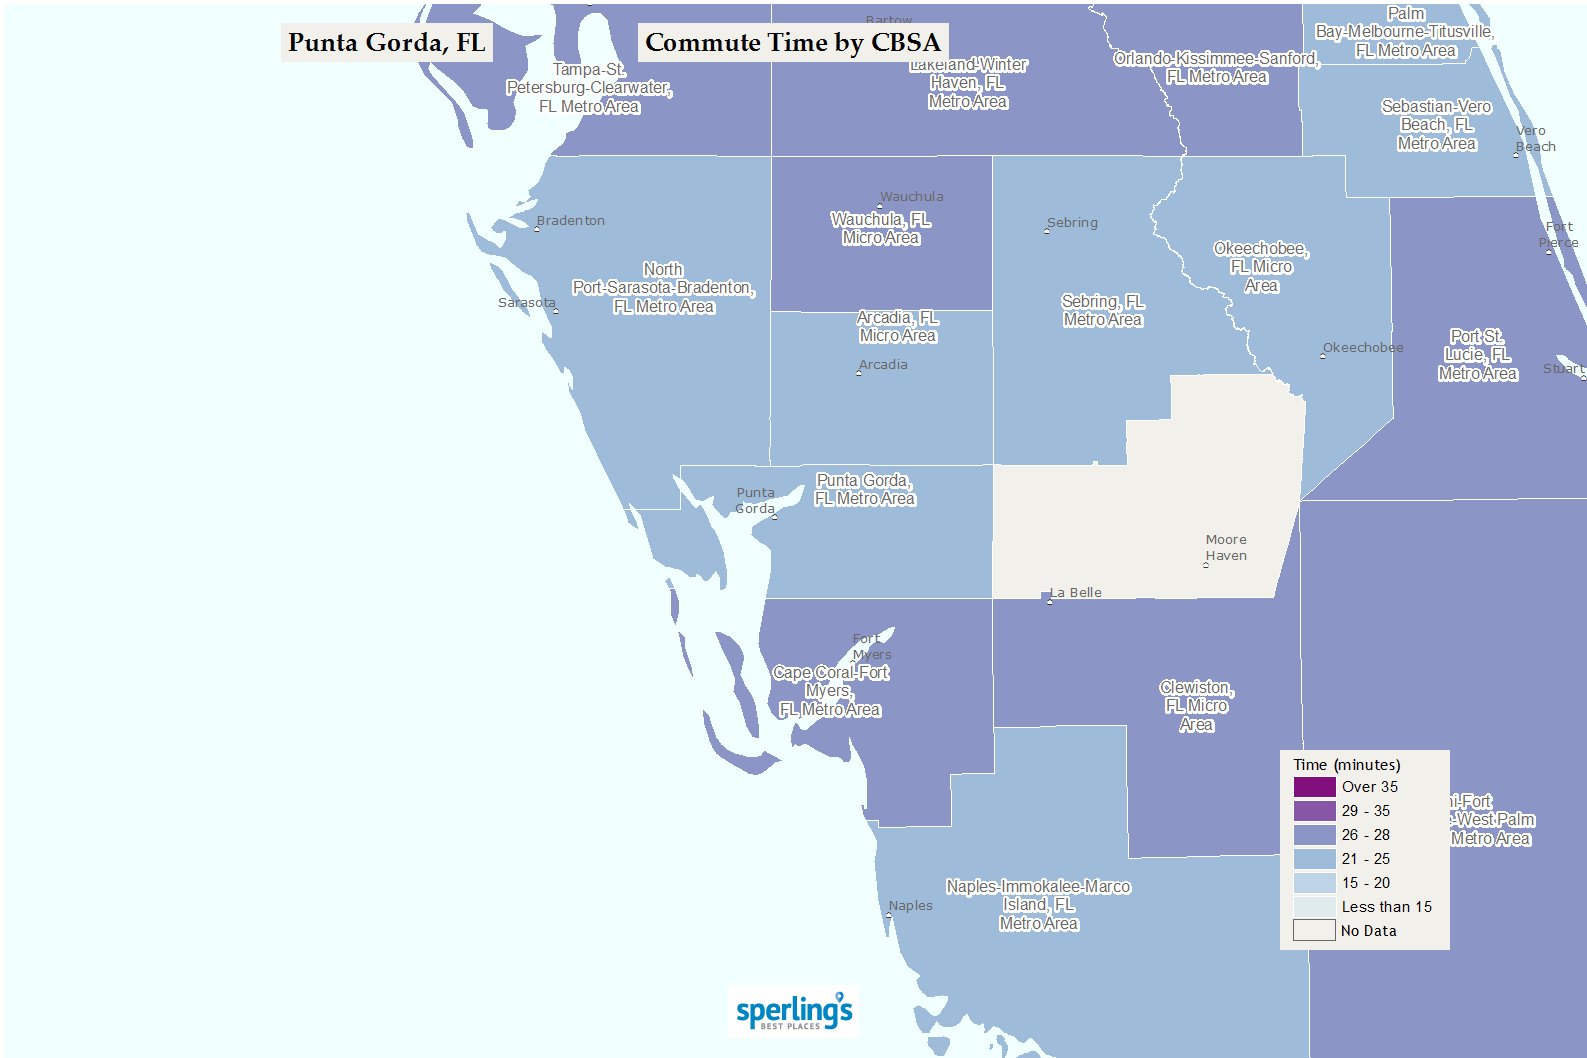 Best Places To Live | Compare Cost Of Living, Crime, Cities, Schools - Englewood Florida Map